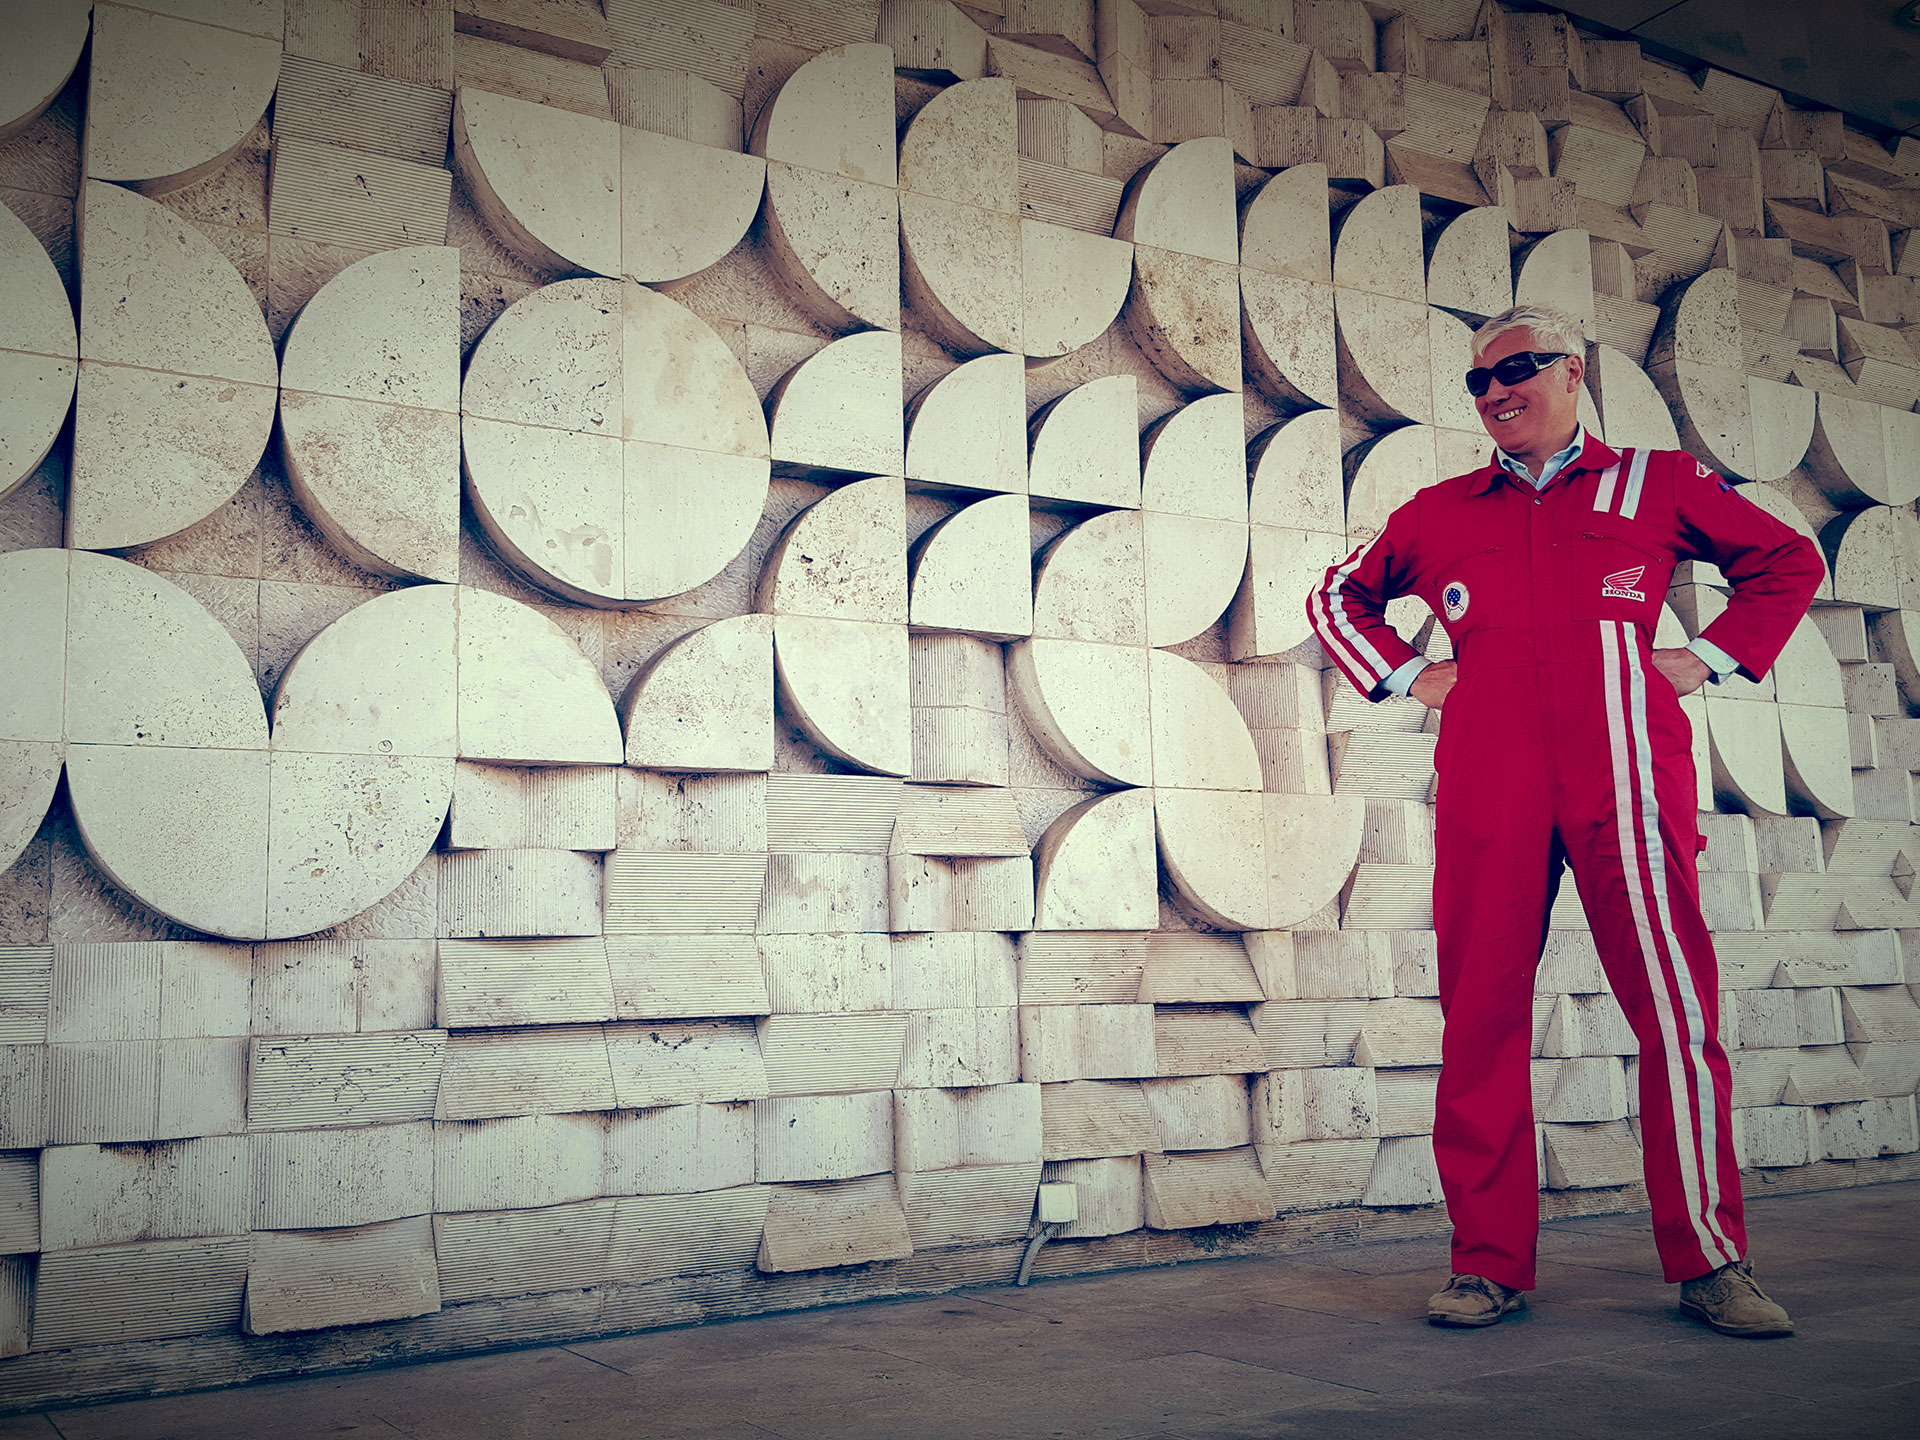 Austin Vince in red overalls by a Socialist Modernist relief tiled mural in Hungary